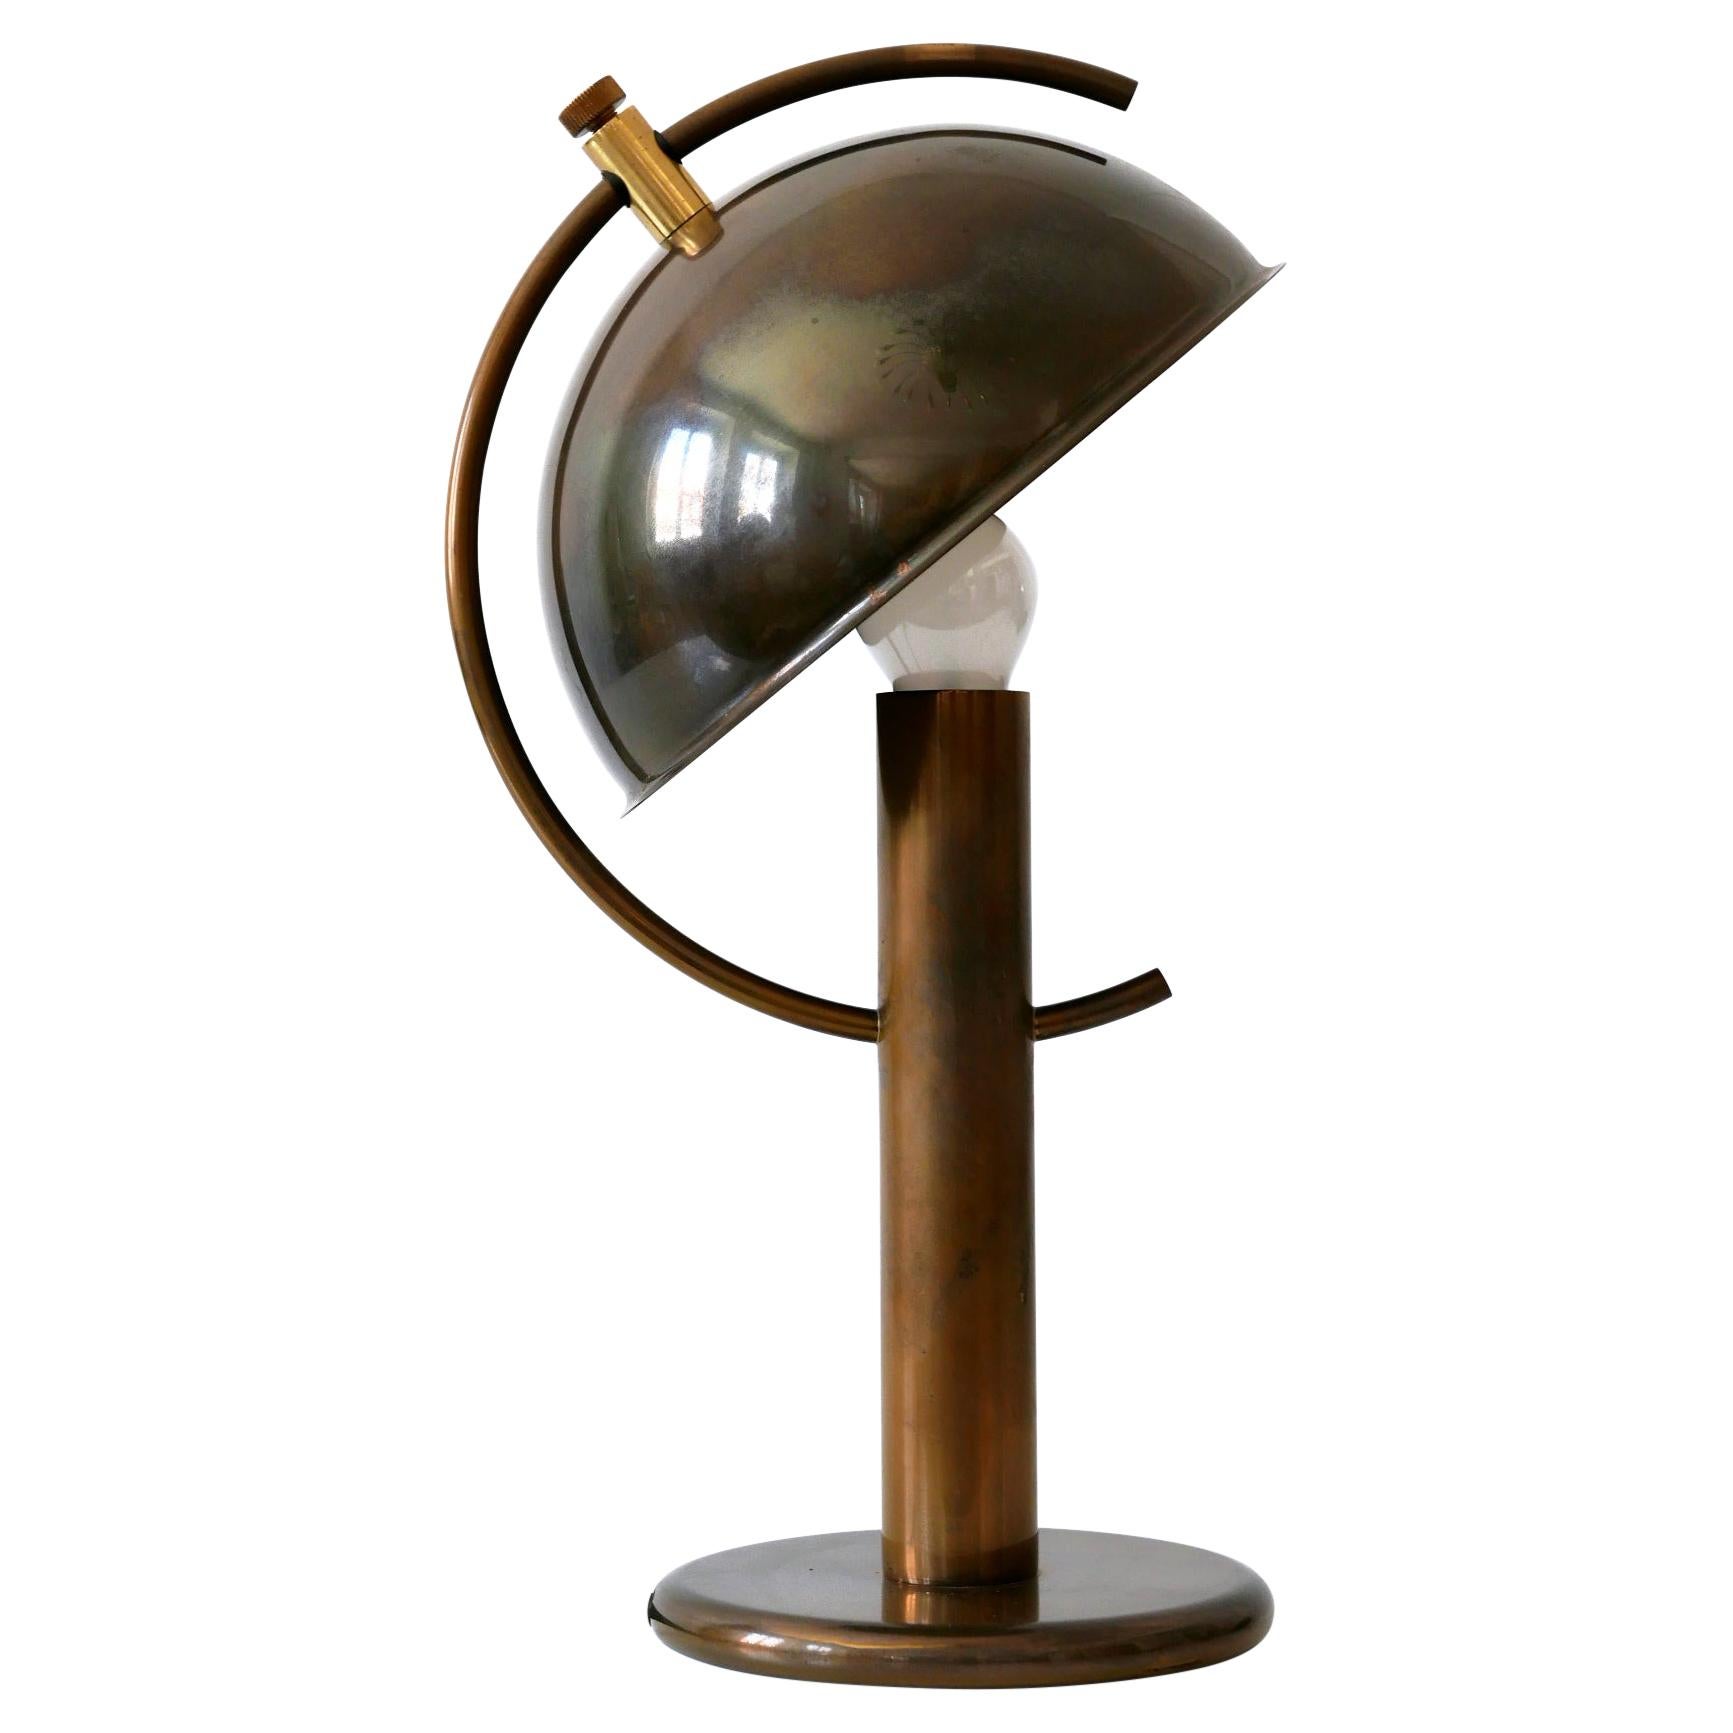 Exceptional Mid-Century Modern Brass Table Lamp by Florian Schulz Germany 1970s